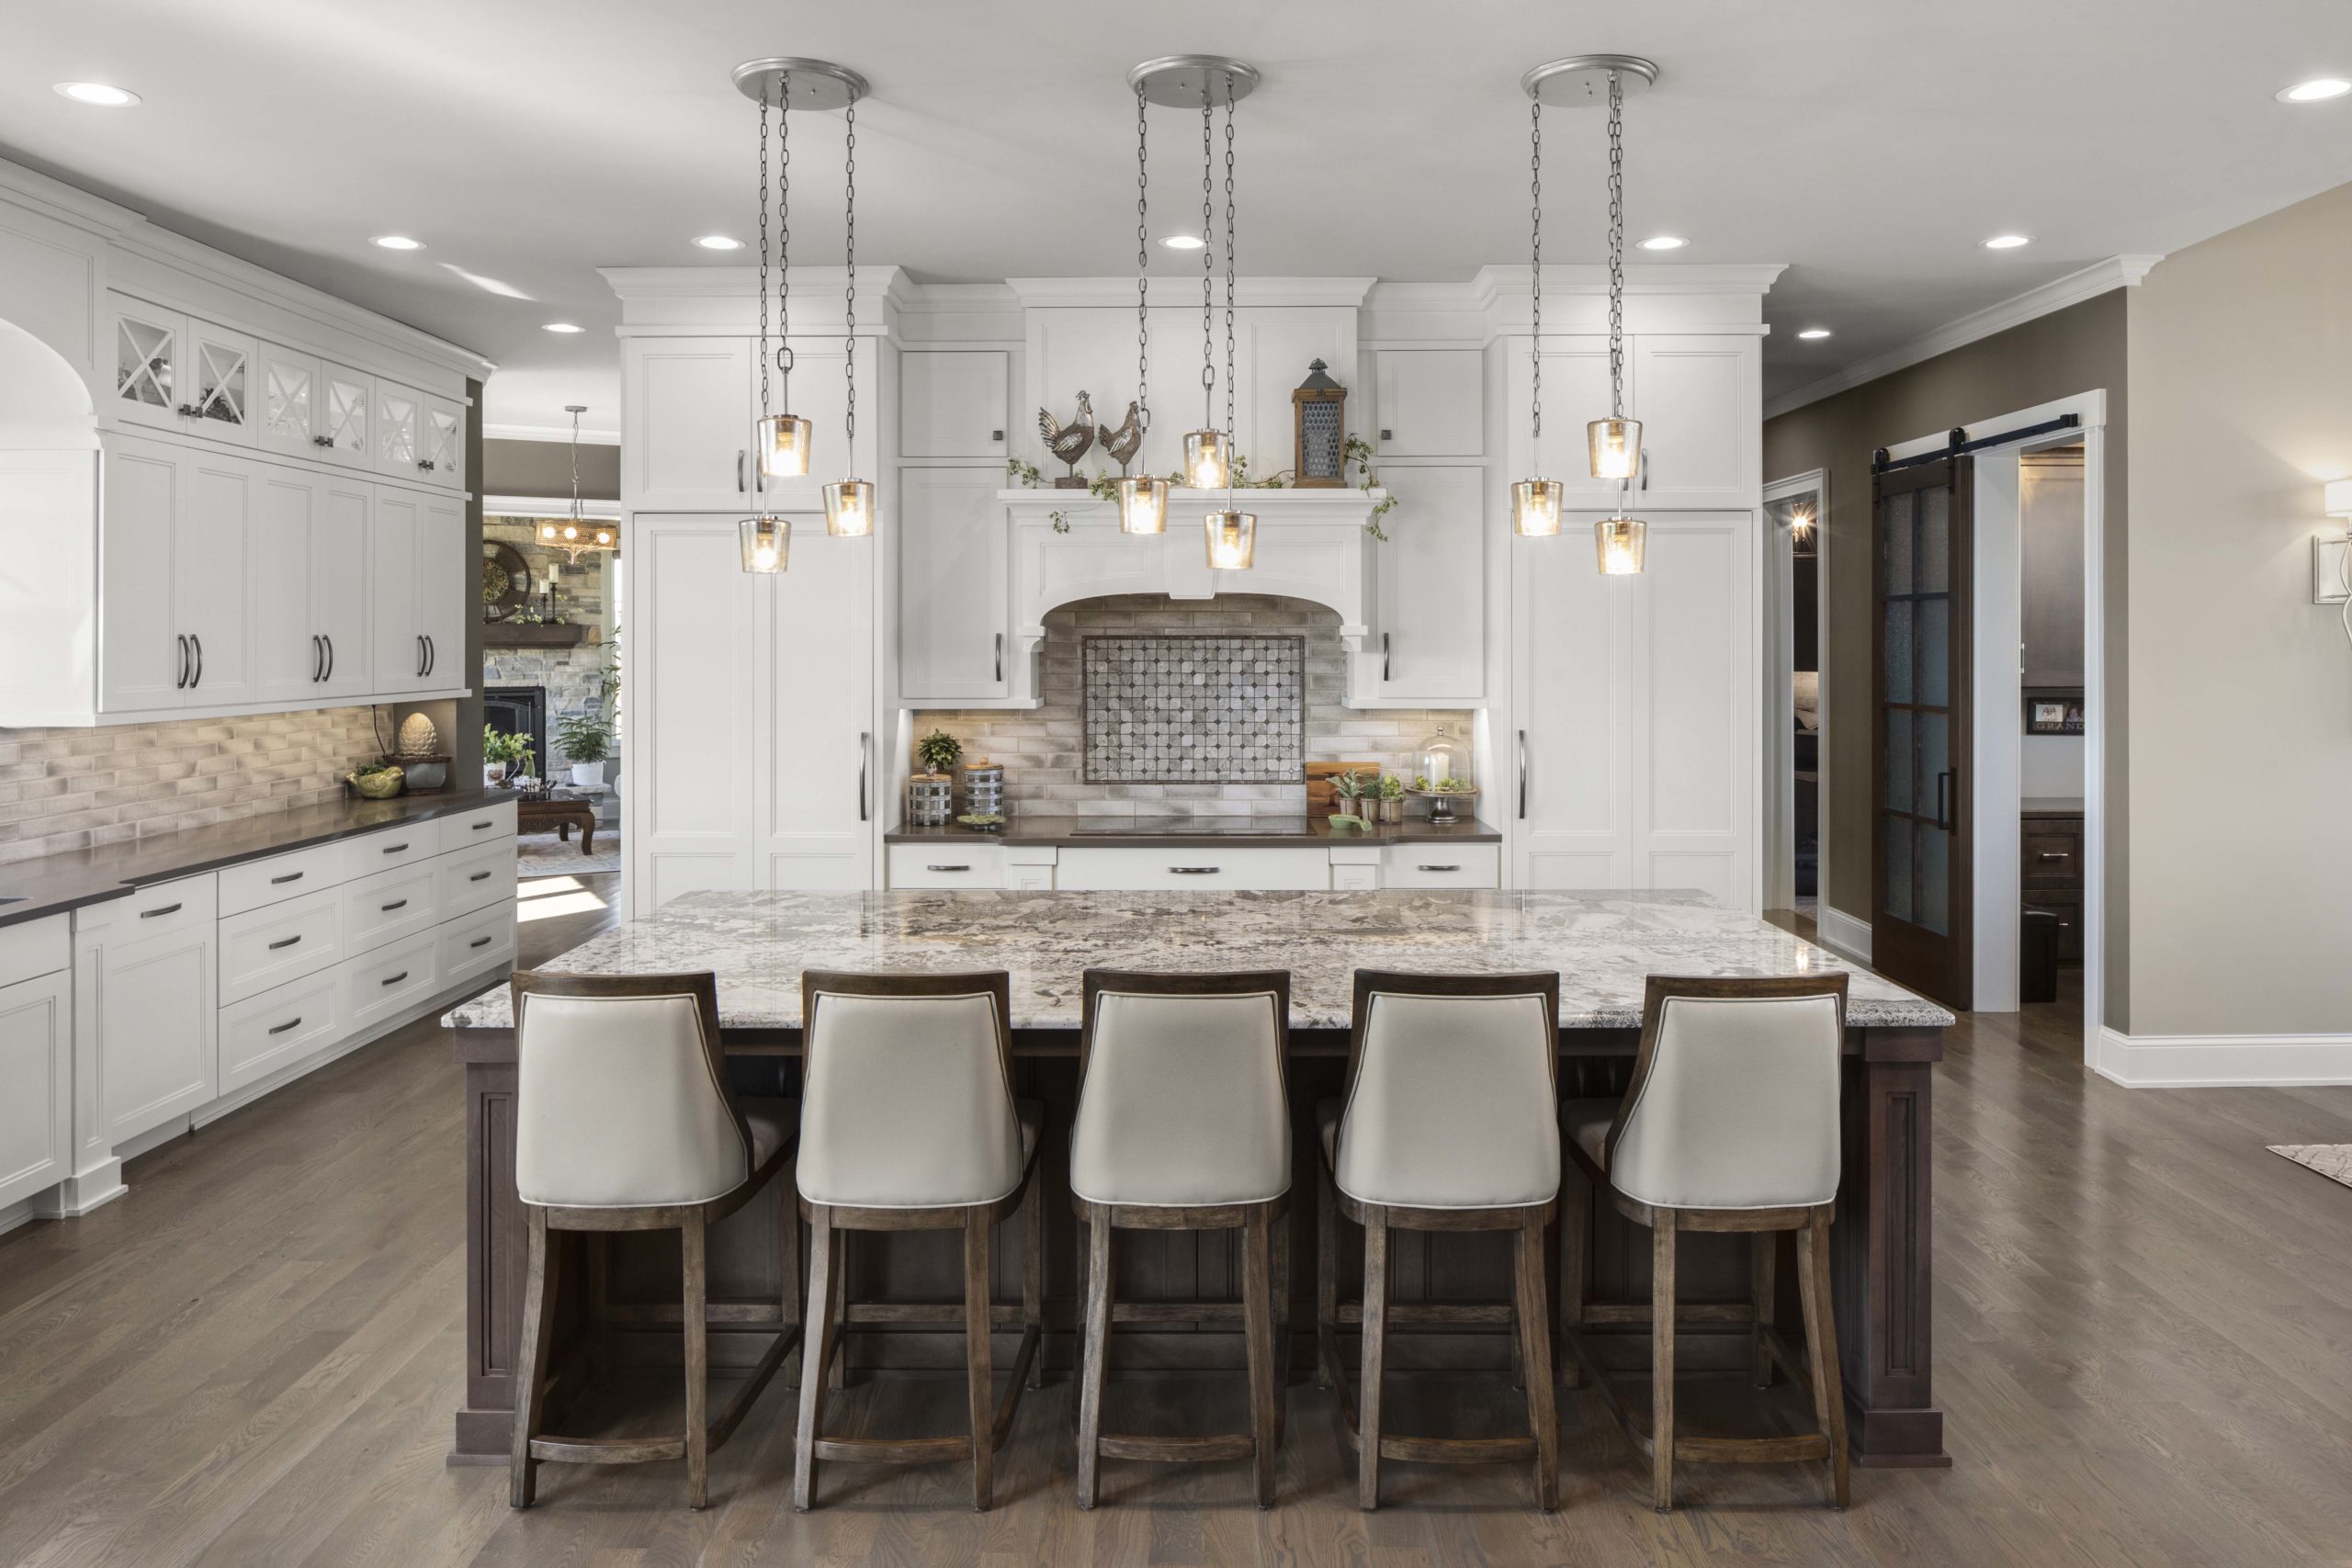 A prairie transitional custom home with a large kitchen featuring a center island and bar stools.